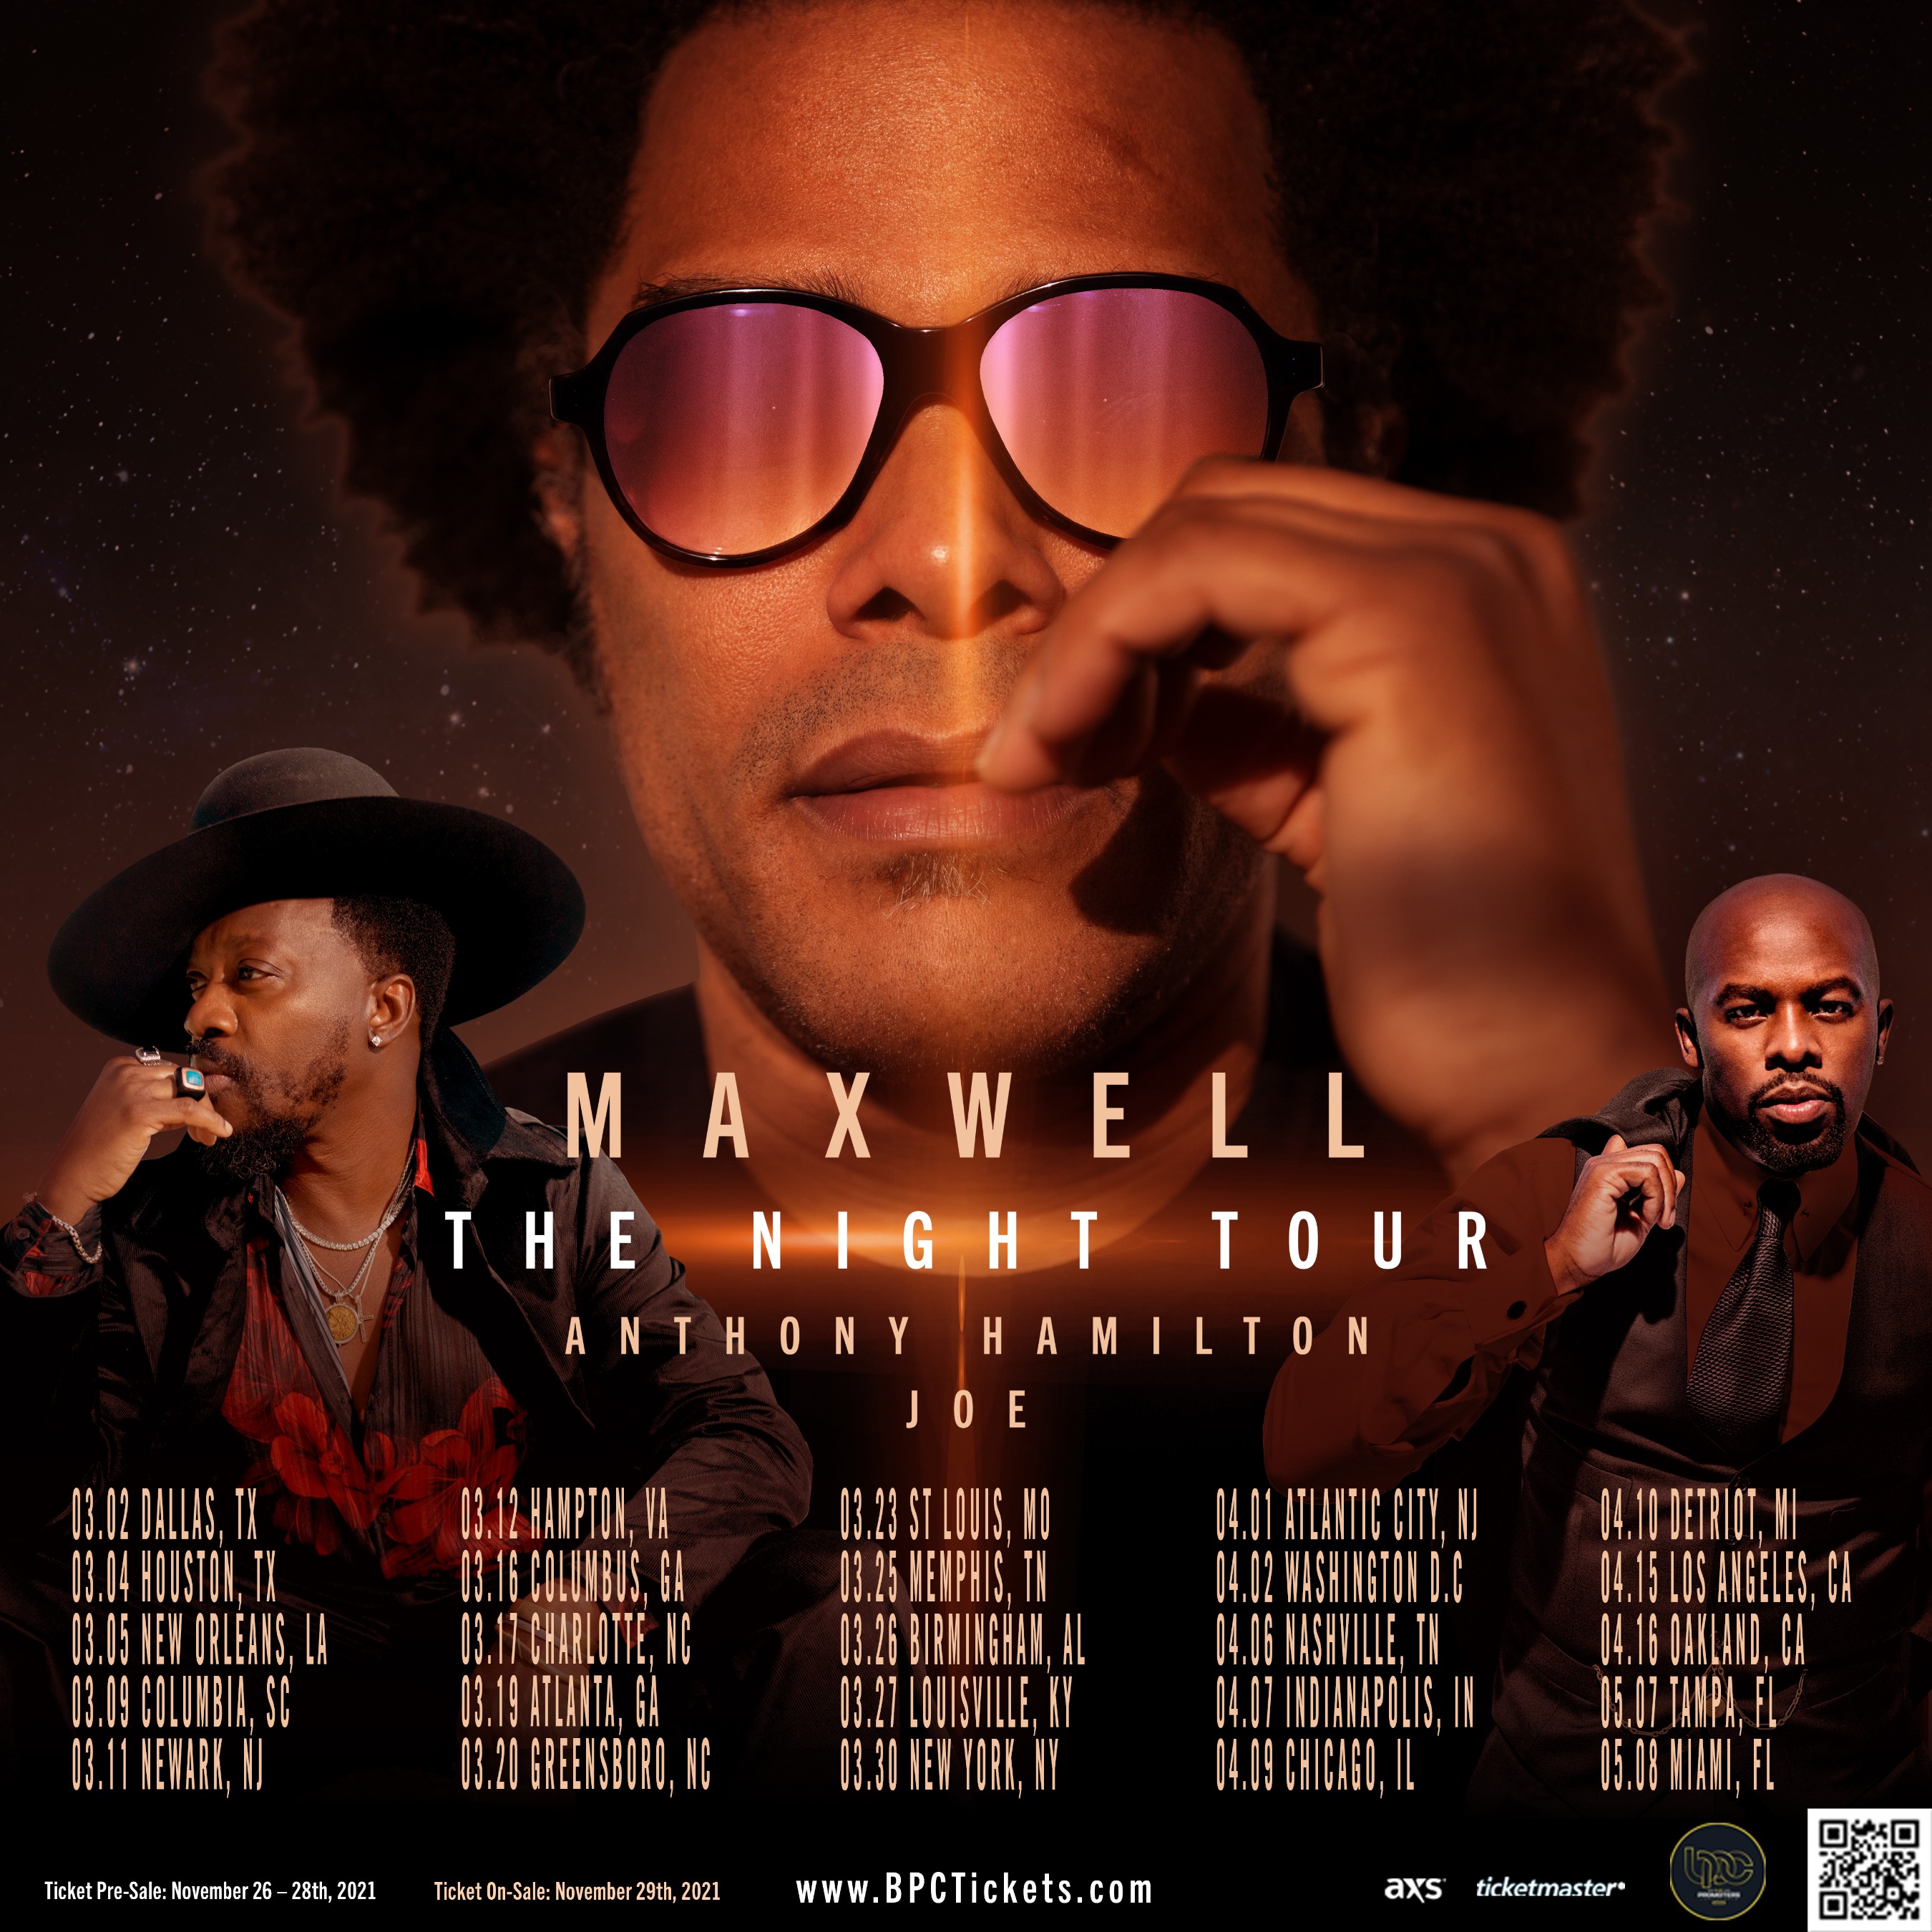 Maxwell’s The Night Tour dates and tour listings.